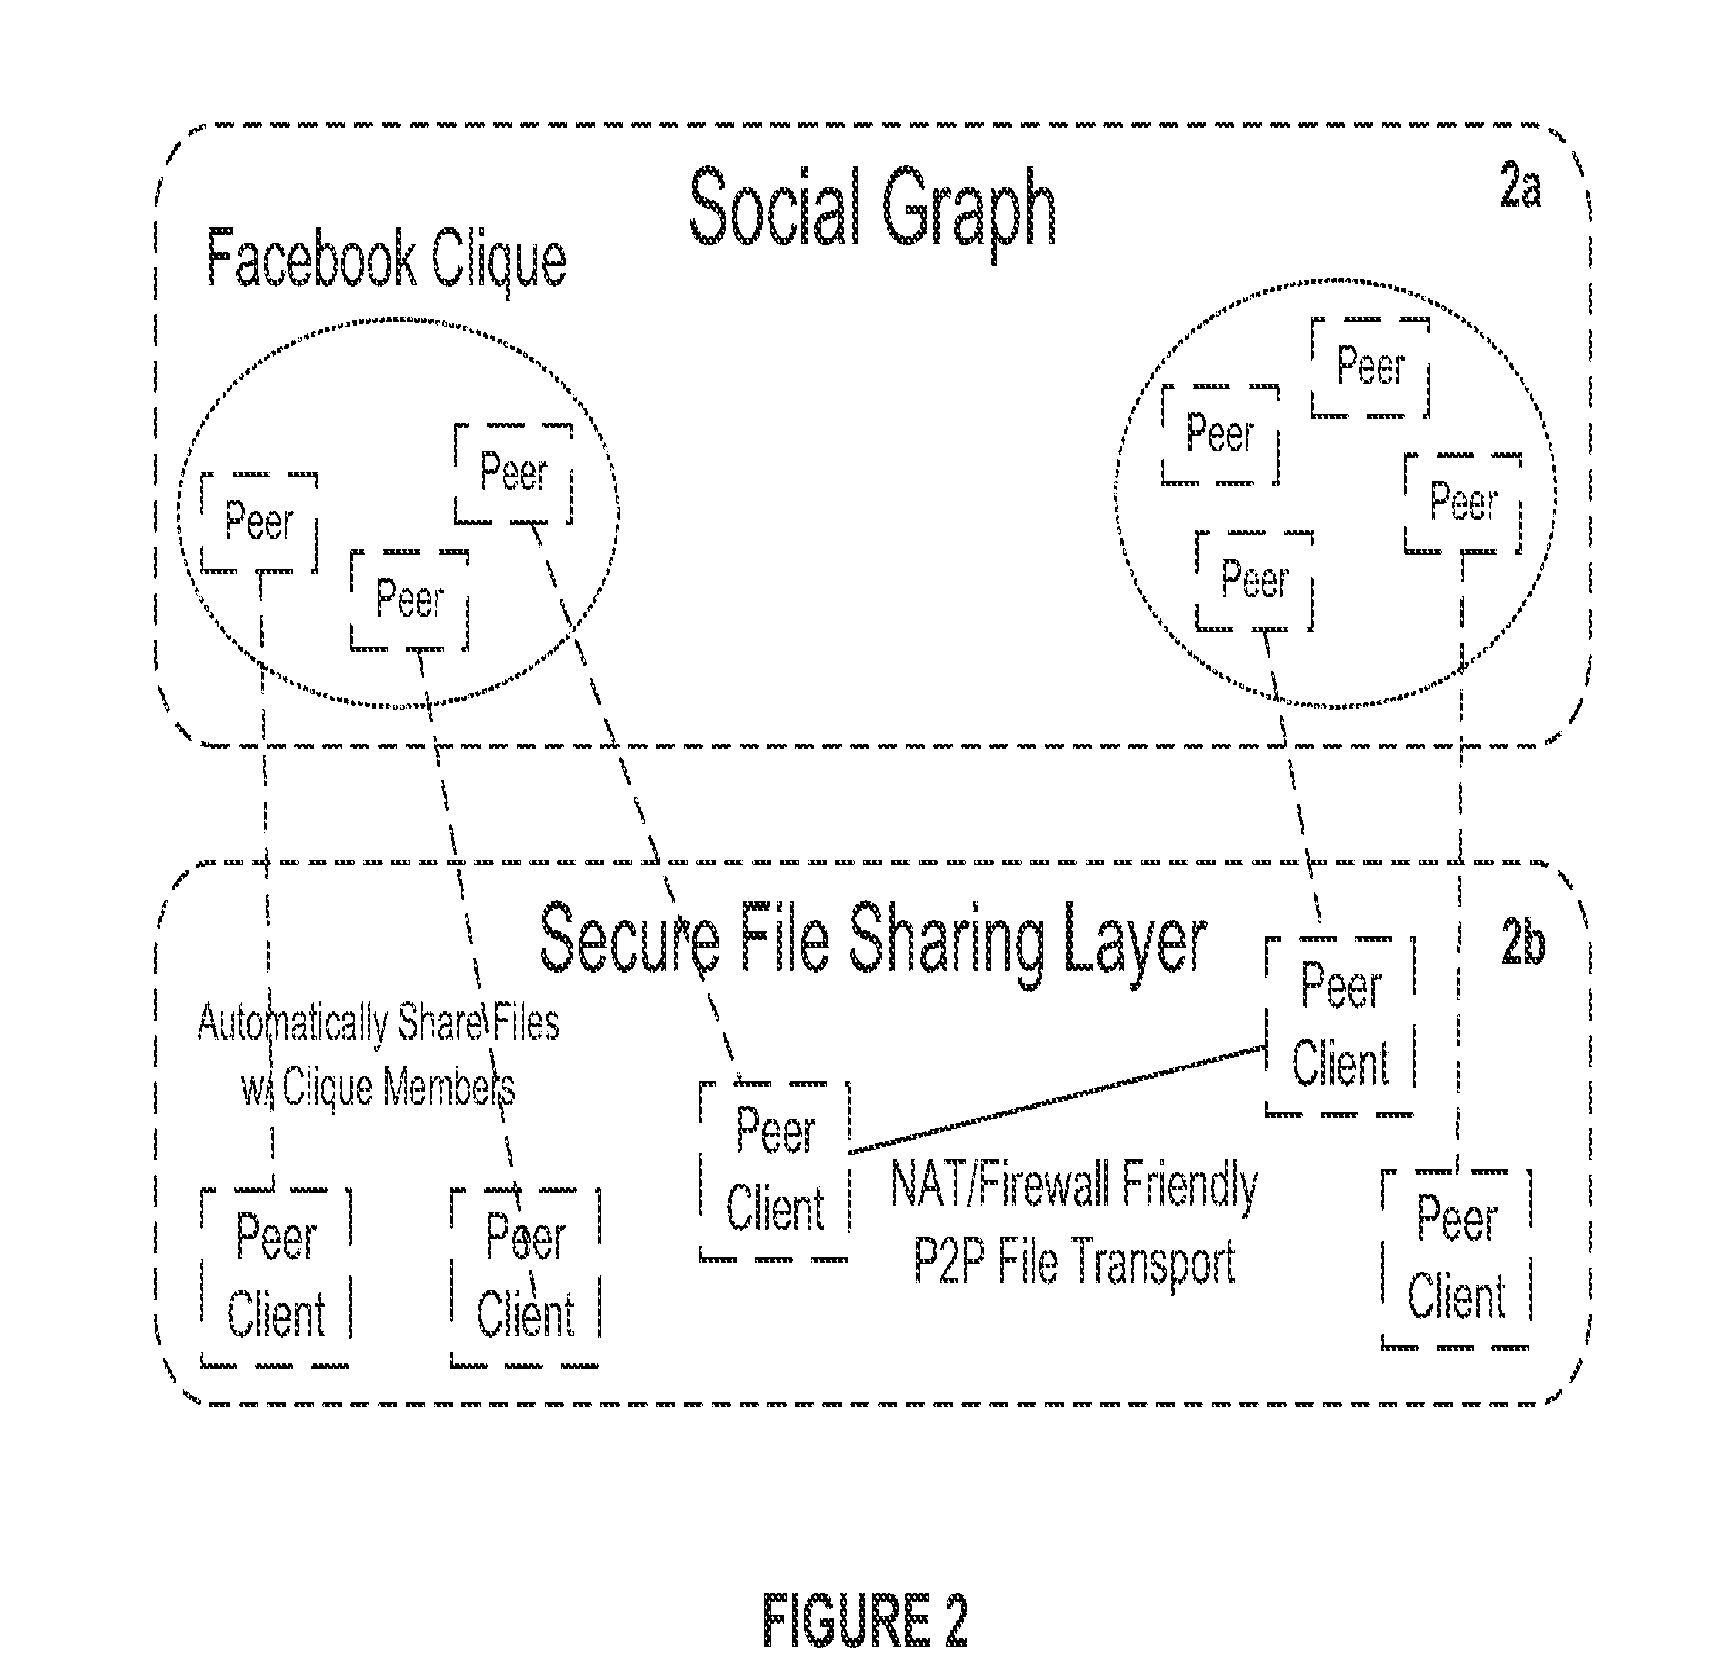 System and method for anonymous addressing of content on network peers and for prvate peer-to-peer file sharing